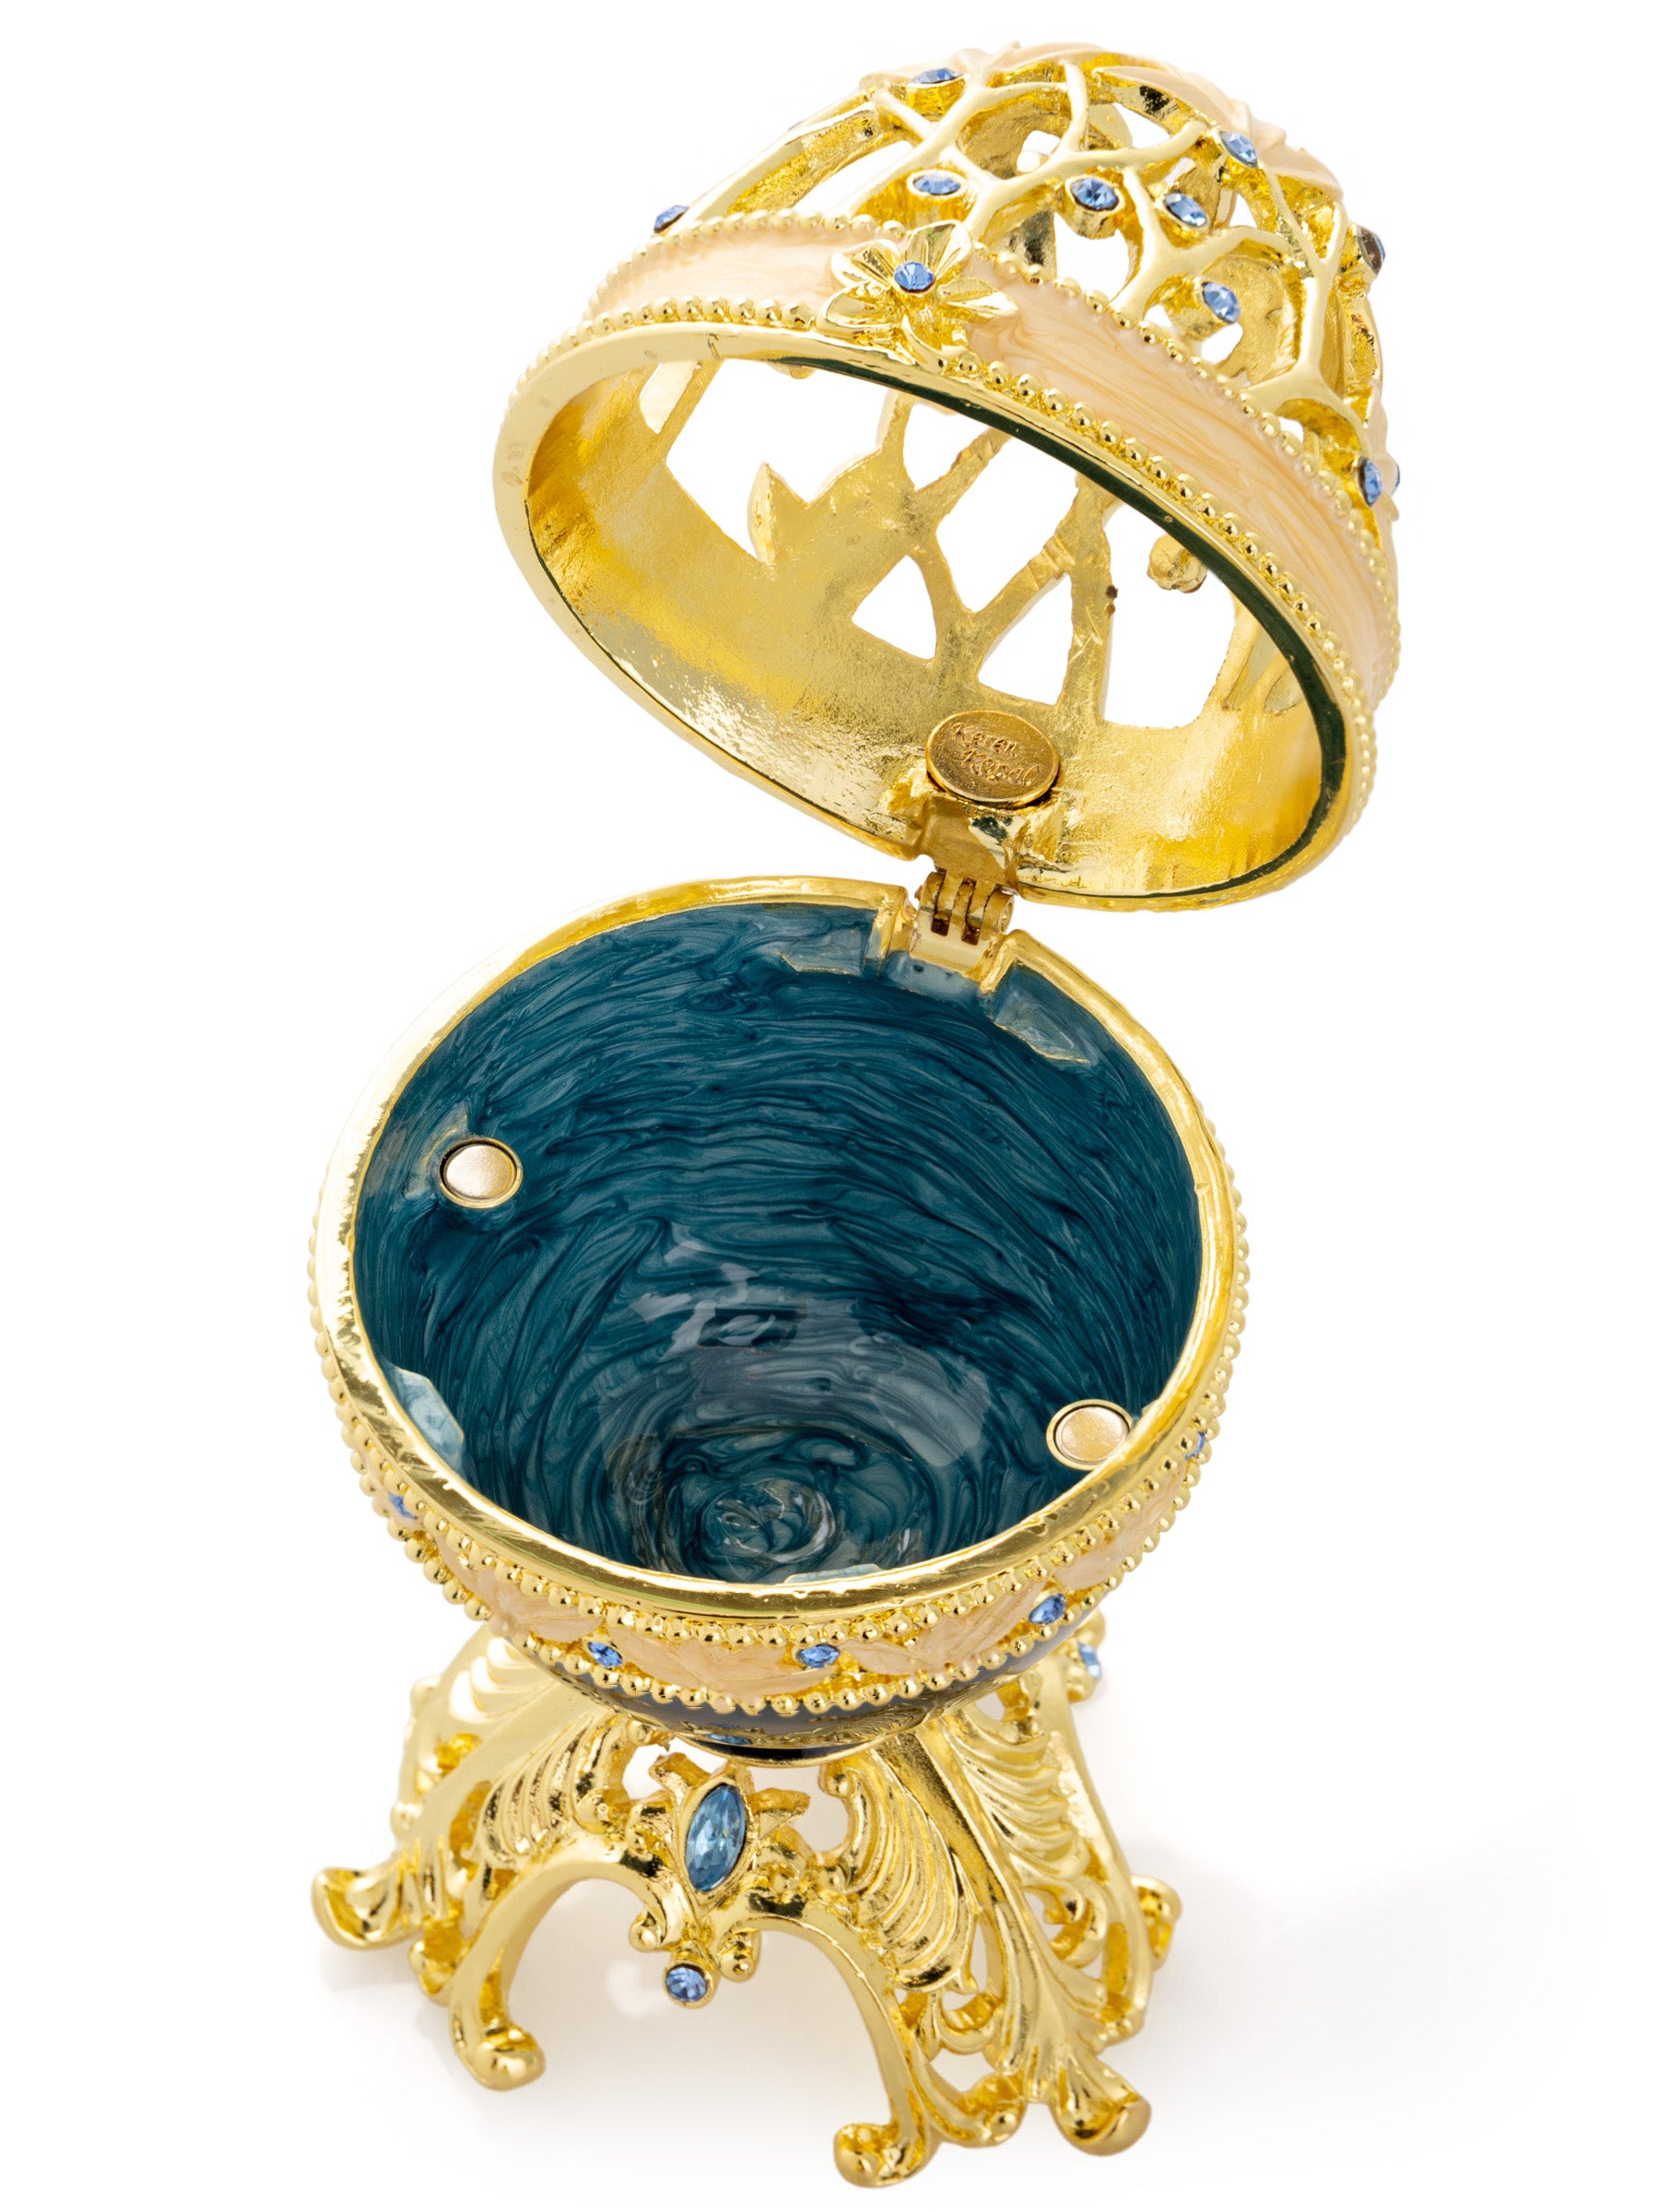 Golden Blue Faberge Egg with a Golden Elephant